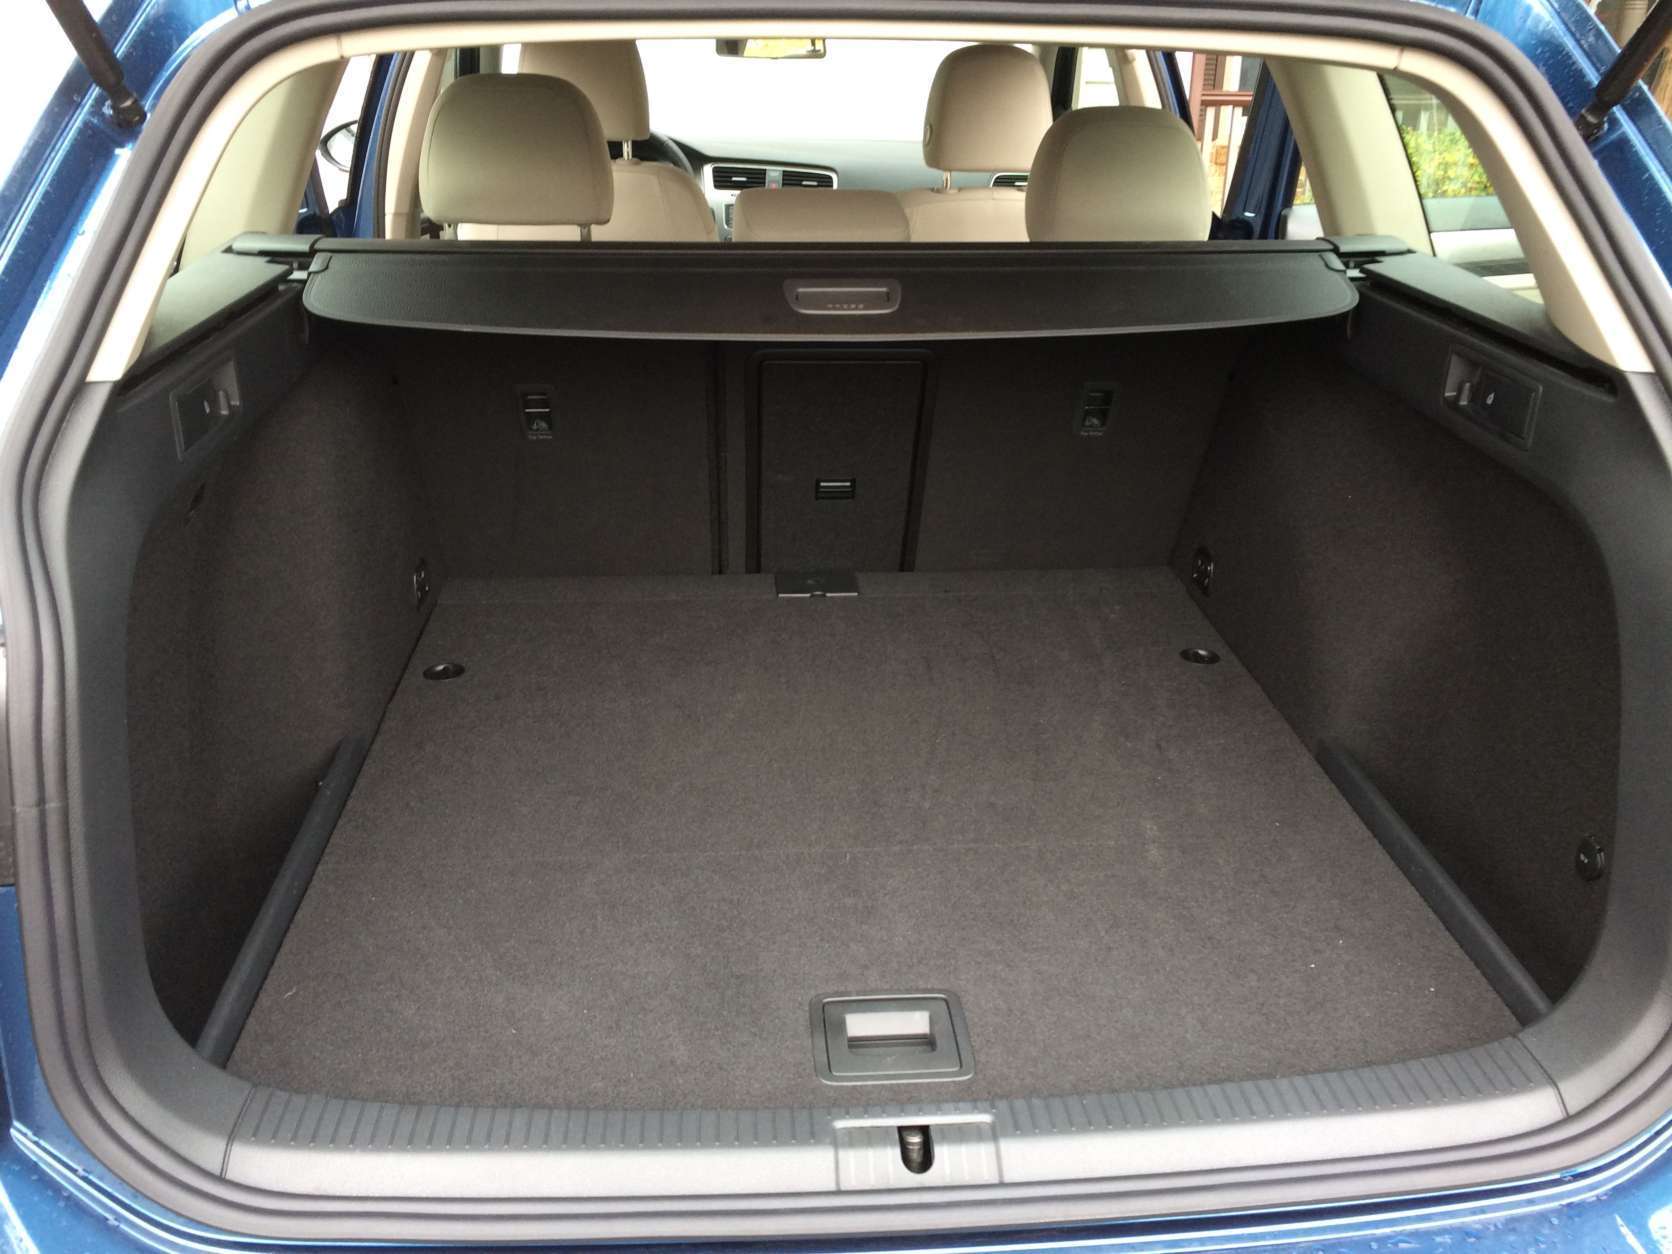 The rear cargo area is large for a more compact car and laying down the rear seats allows longer items that most compact car or crossovers would have a problem with. (WTOP/Mike Parris)